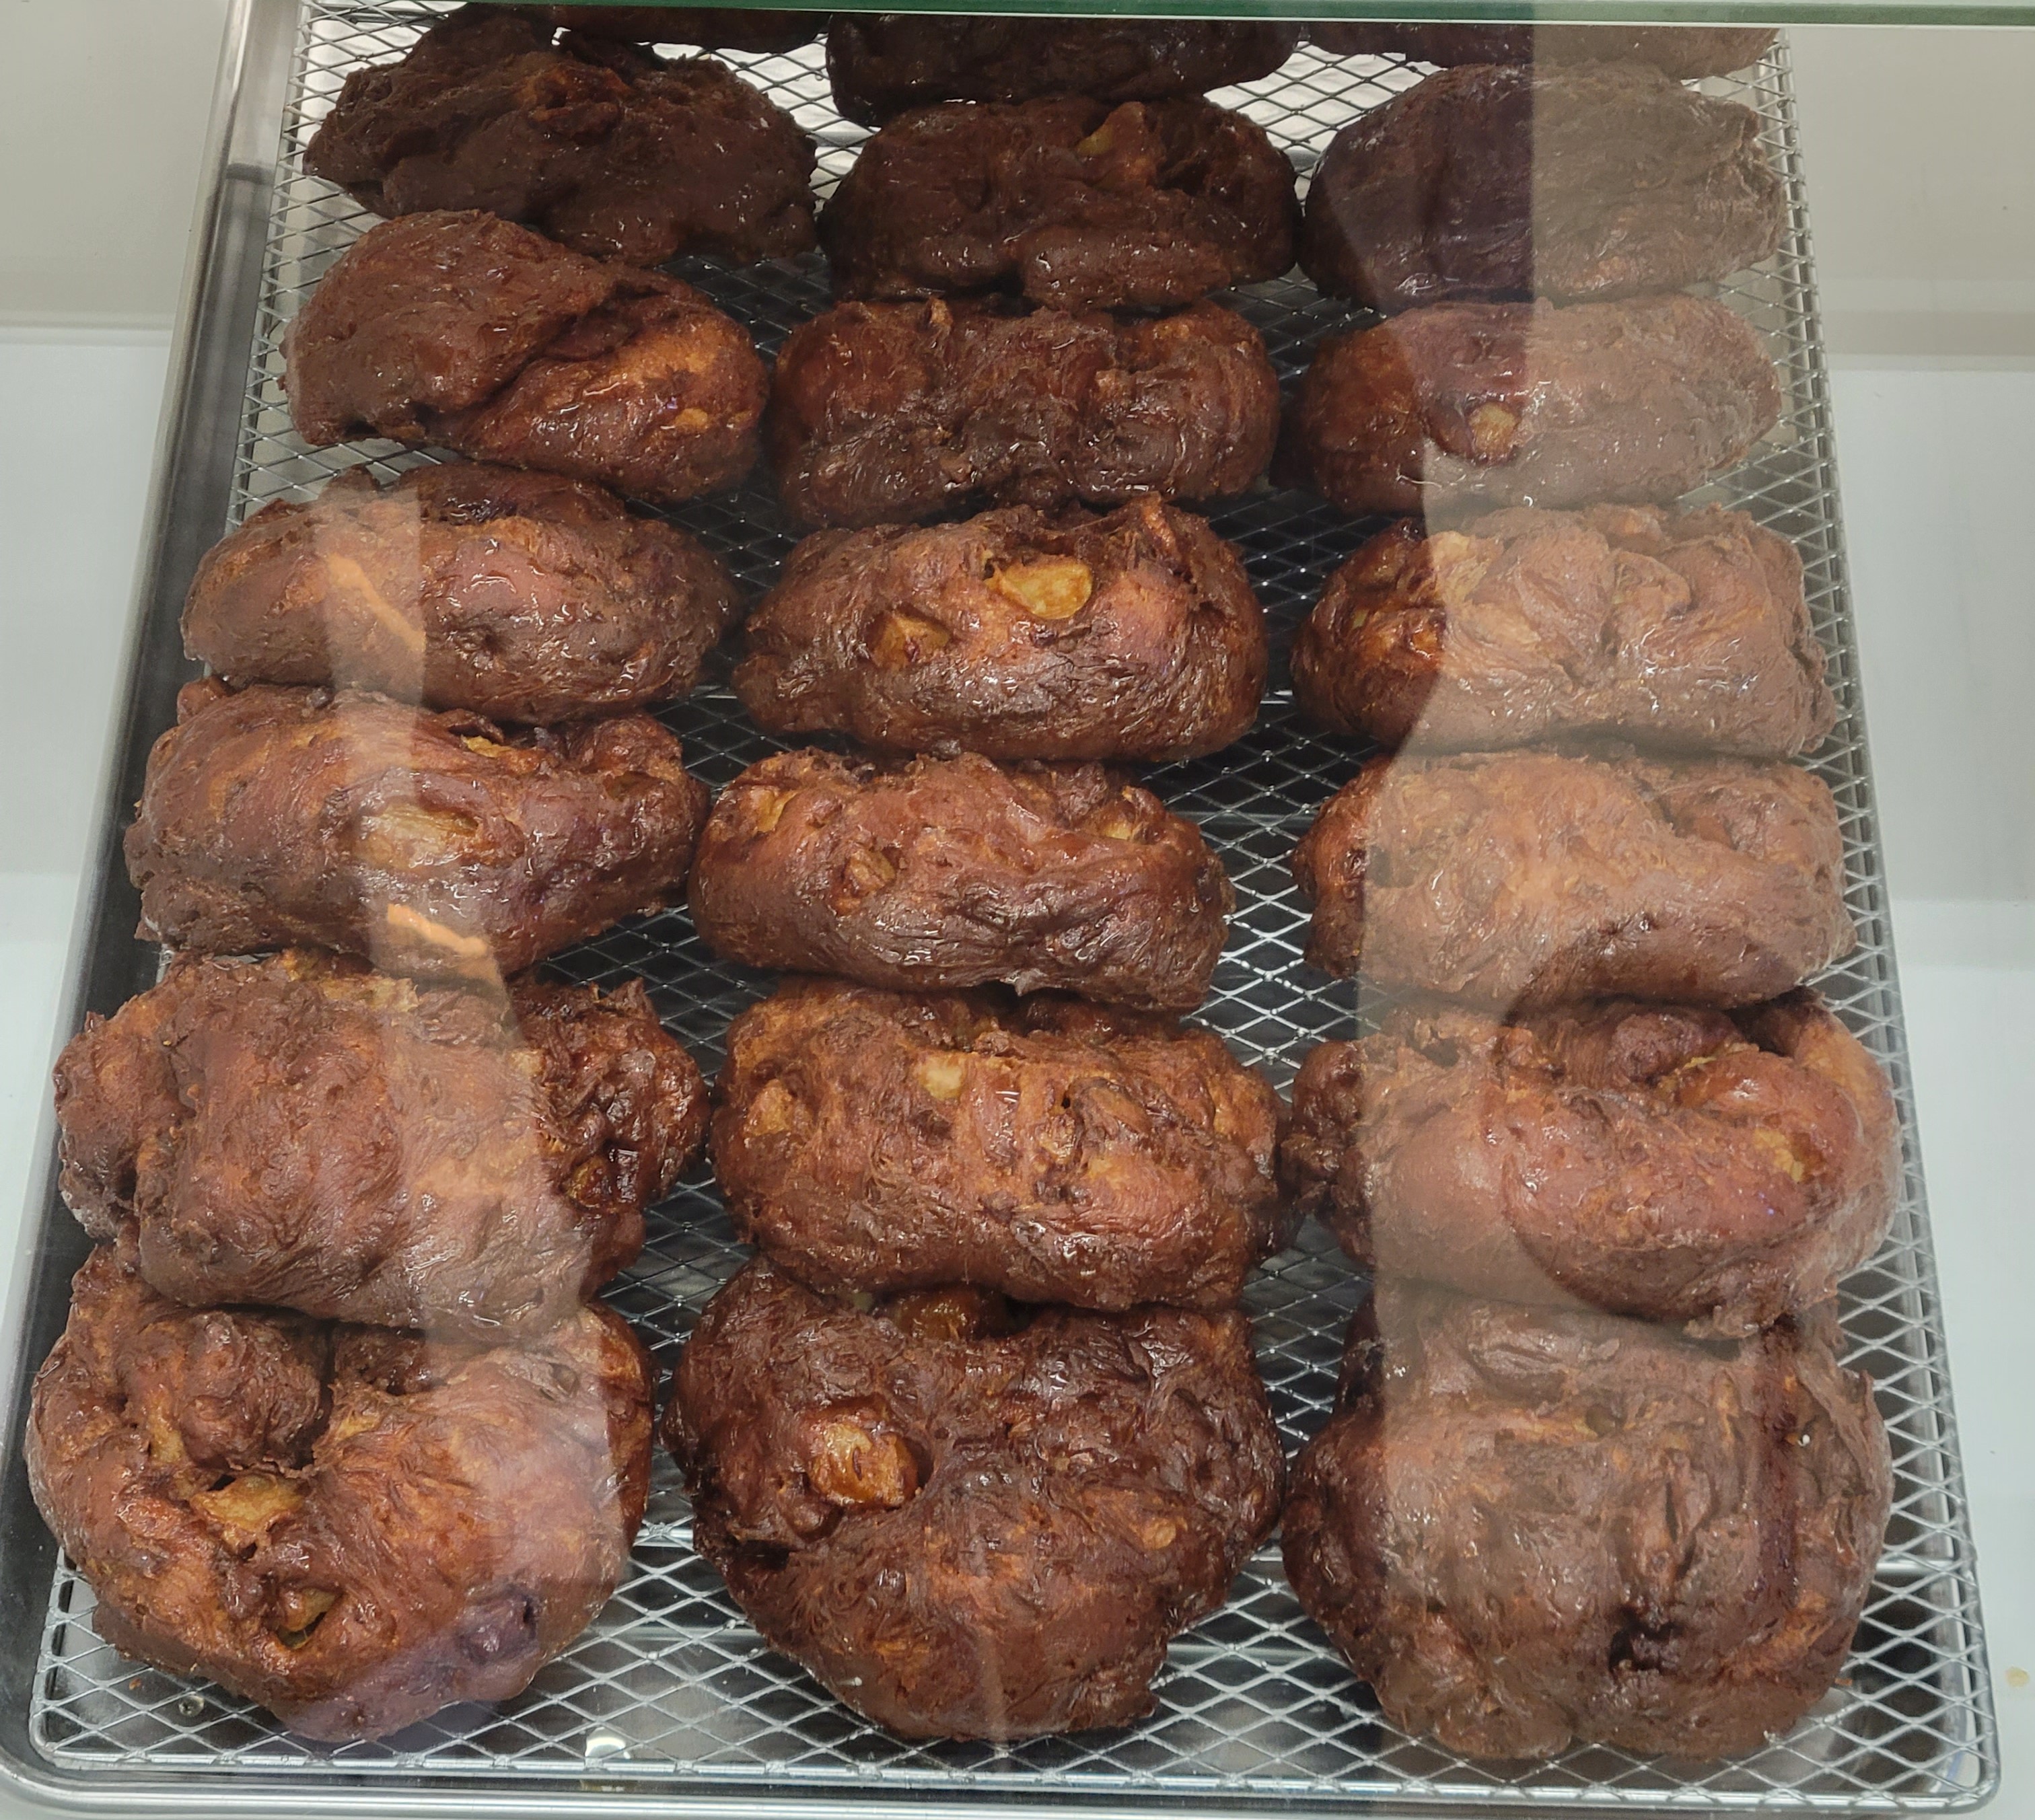 Little Thief apple fritters in display case